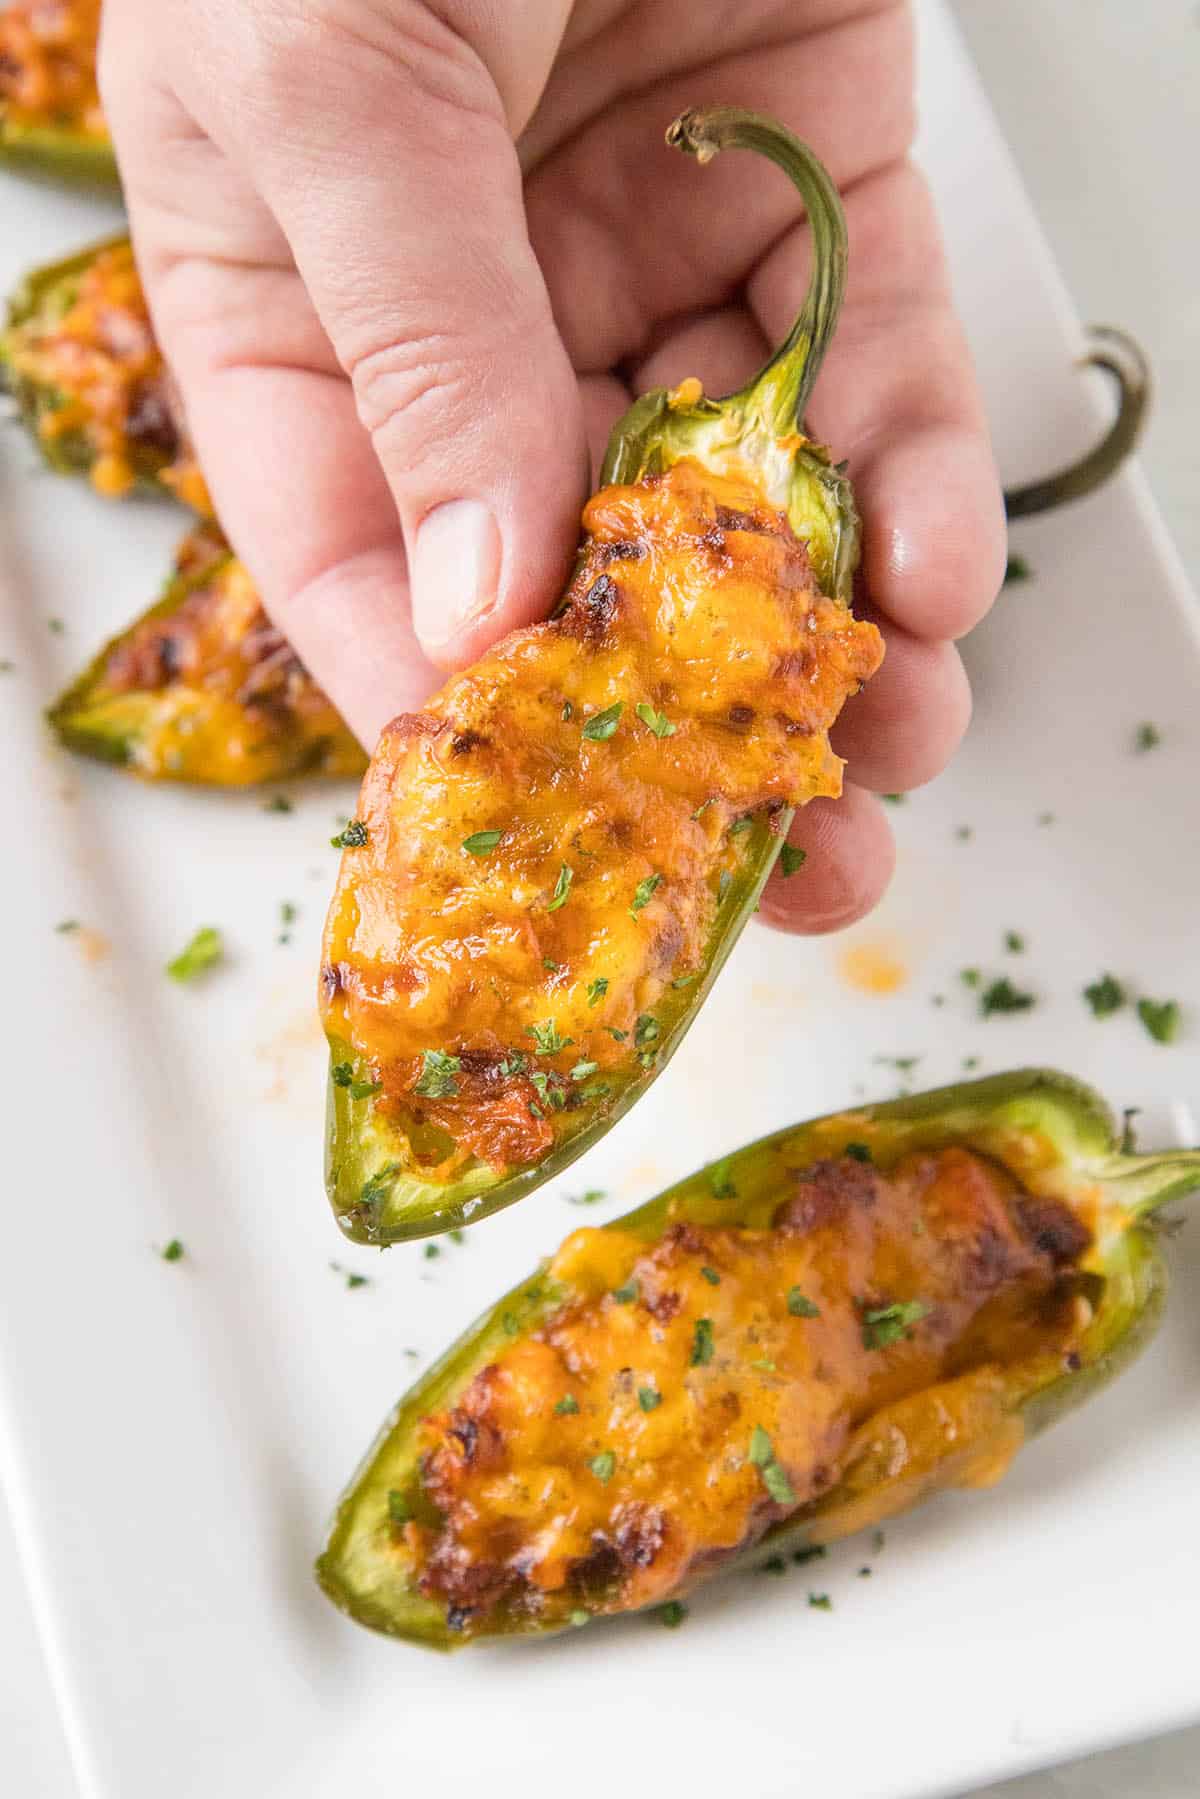 Holding Pulled Pork-Sriracha Jalapeno Poppers in the right hand.